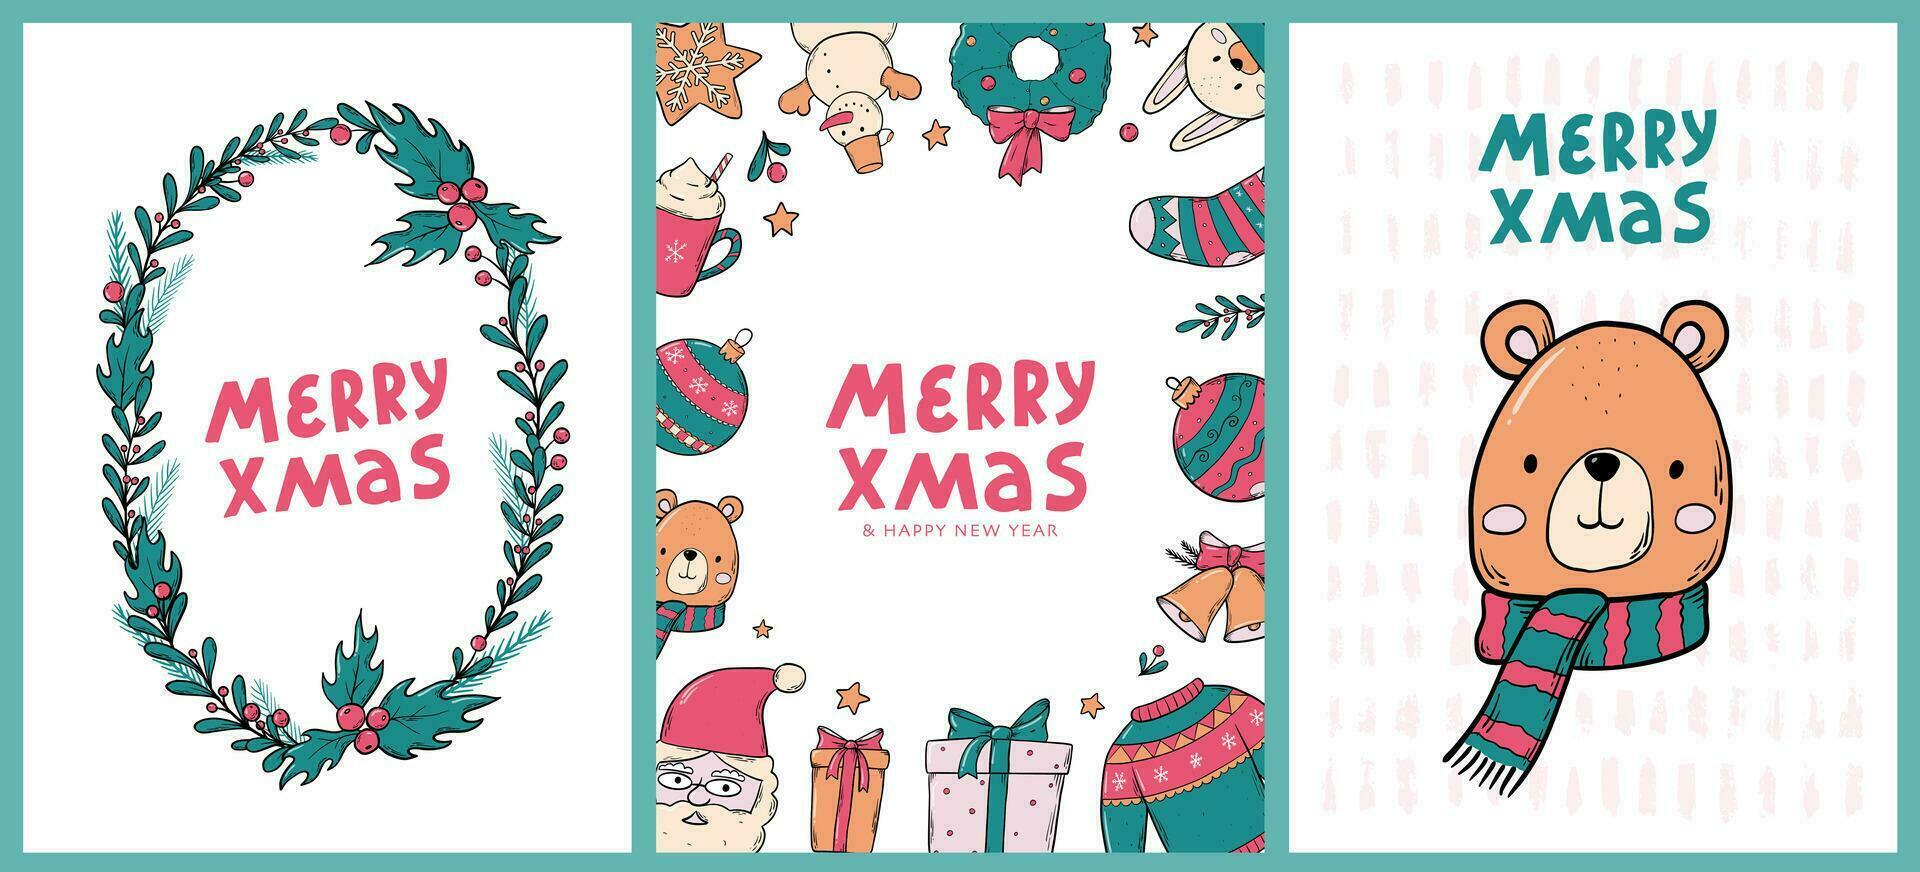 Christmas cards, posters, prints, invitations, templates set decorated with lettering quote and doodles. New year prints, social media templates. EPS 10 vector